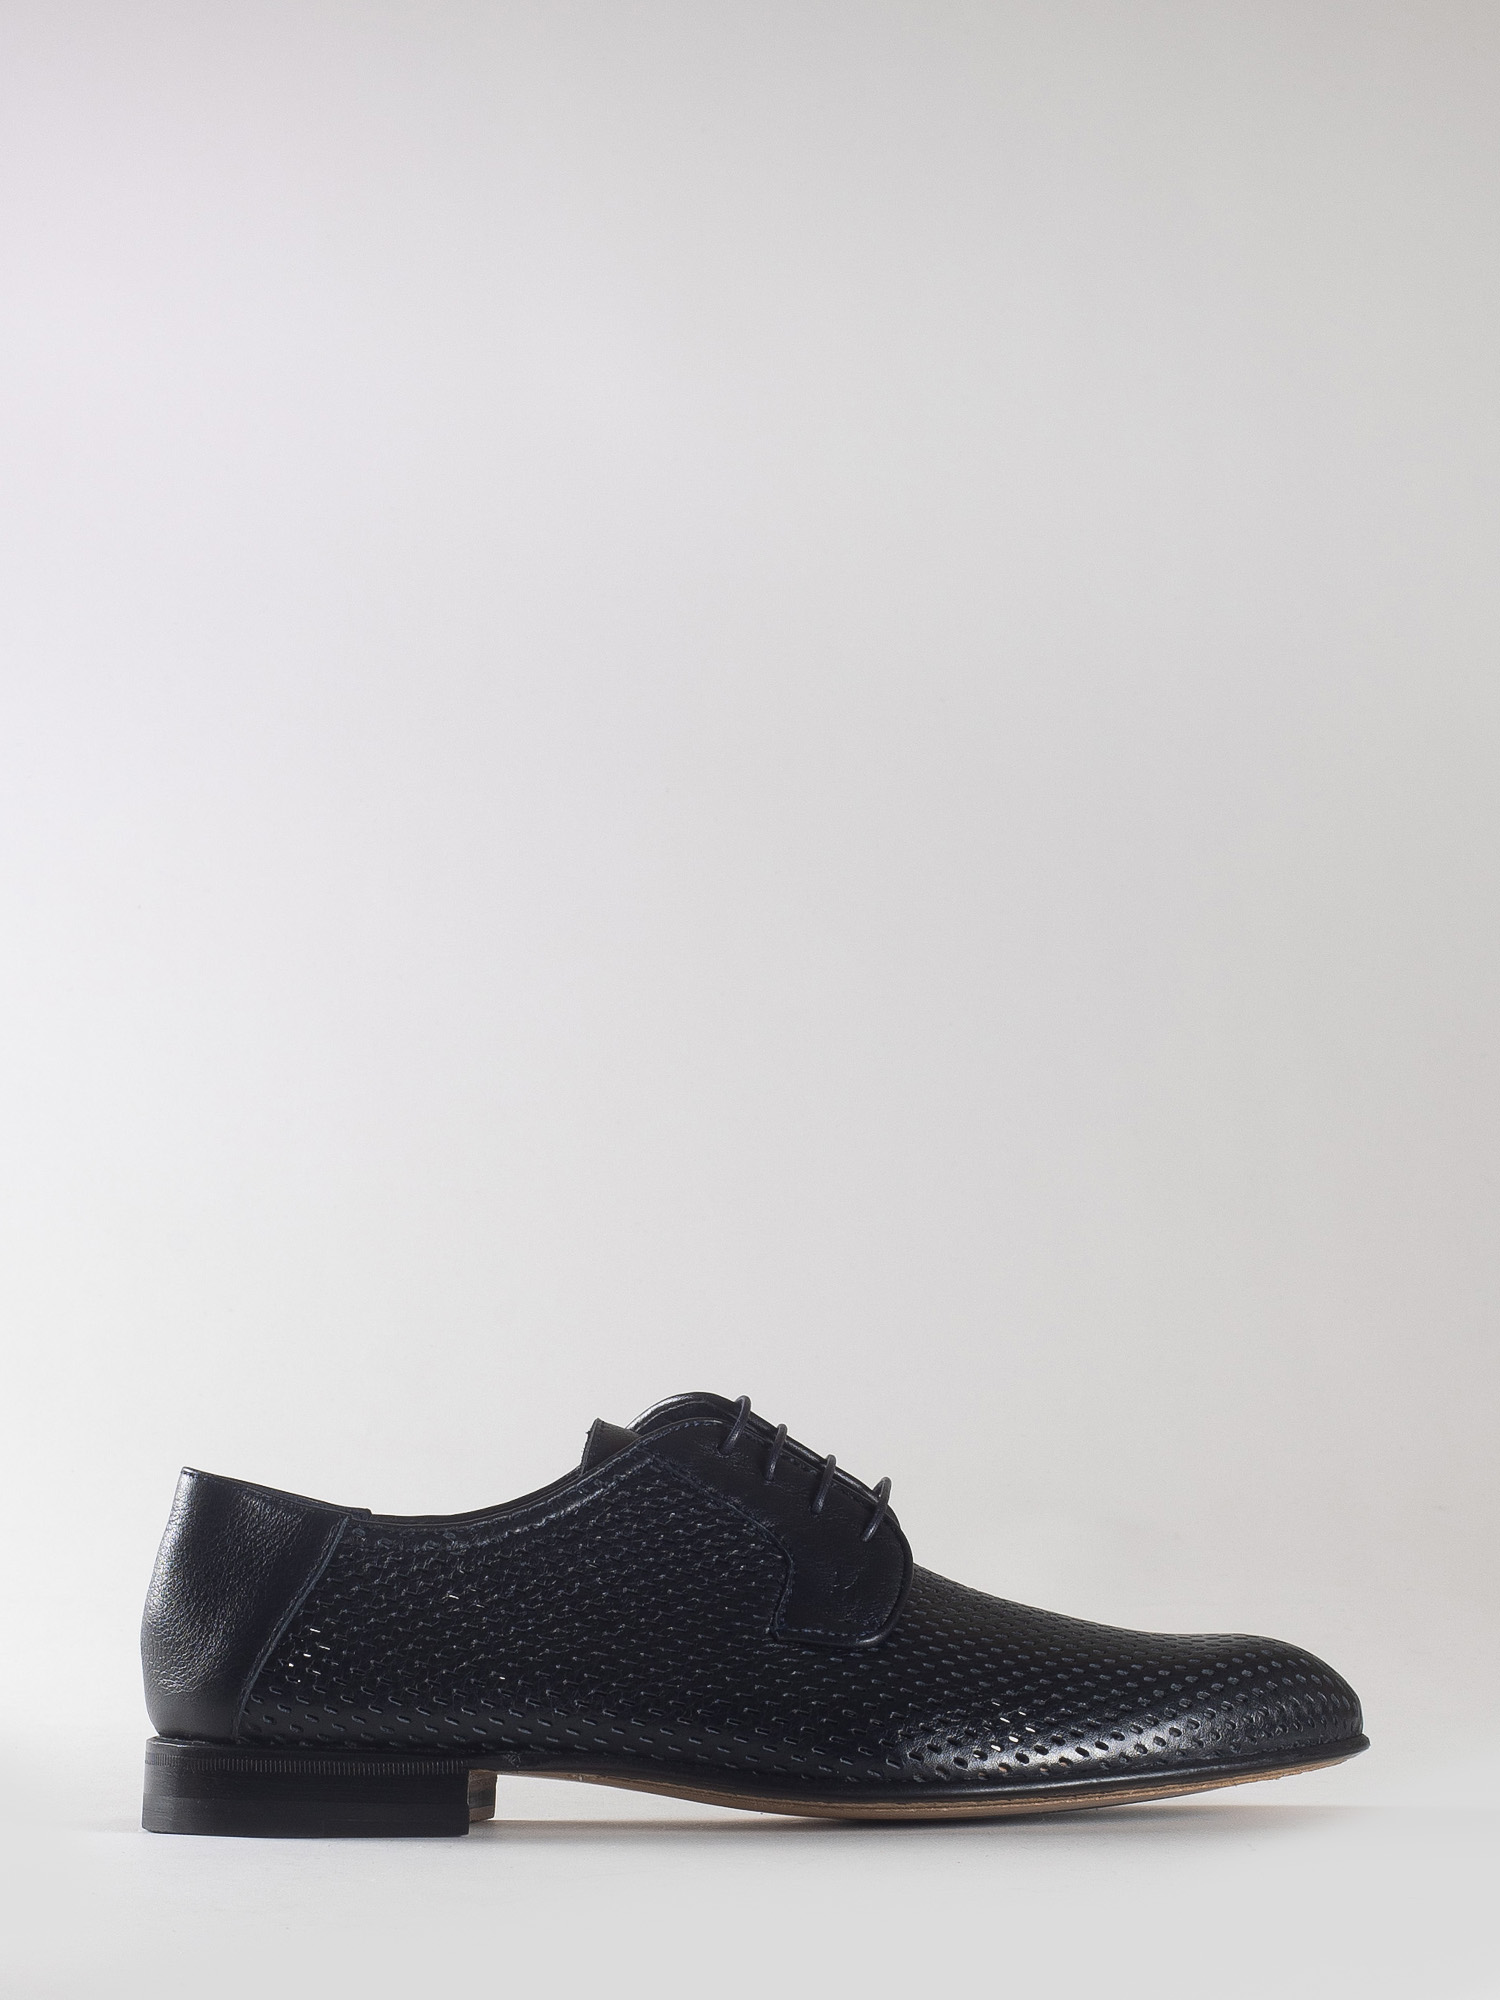 LEATHER SHOES - MORESCHI